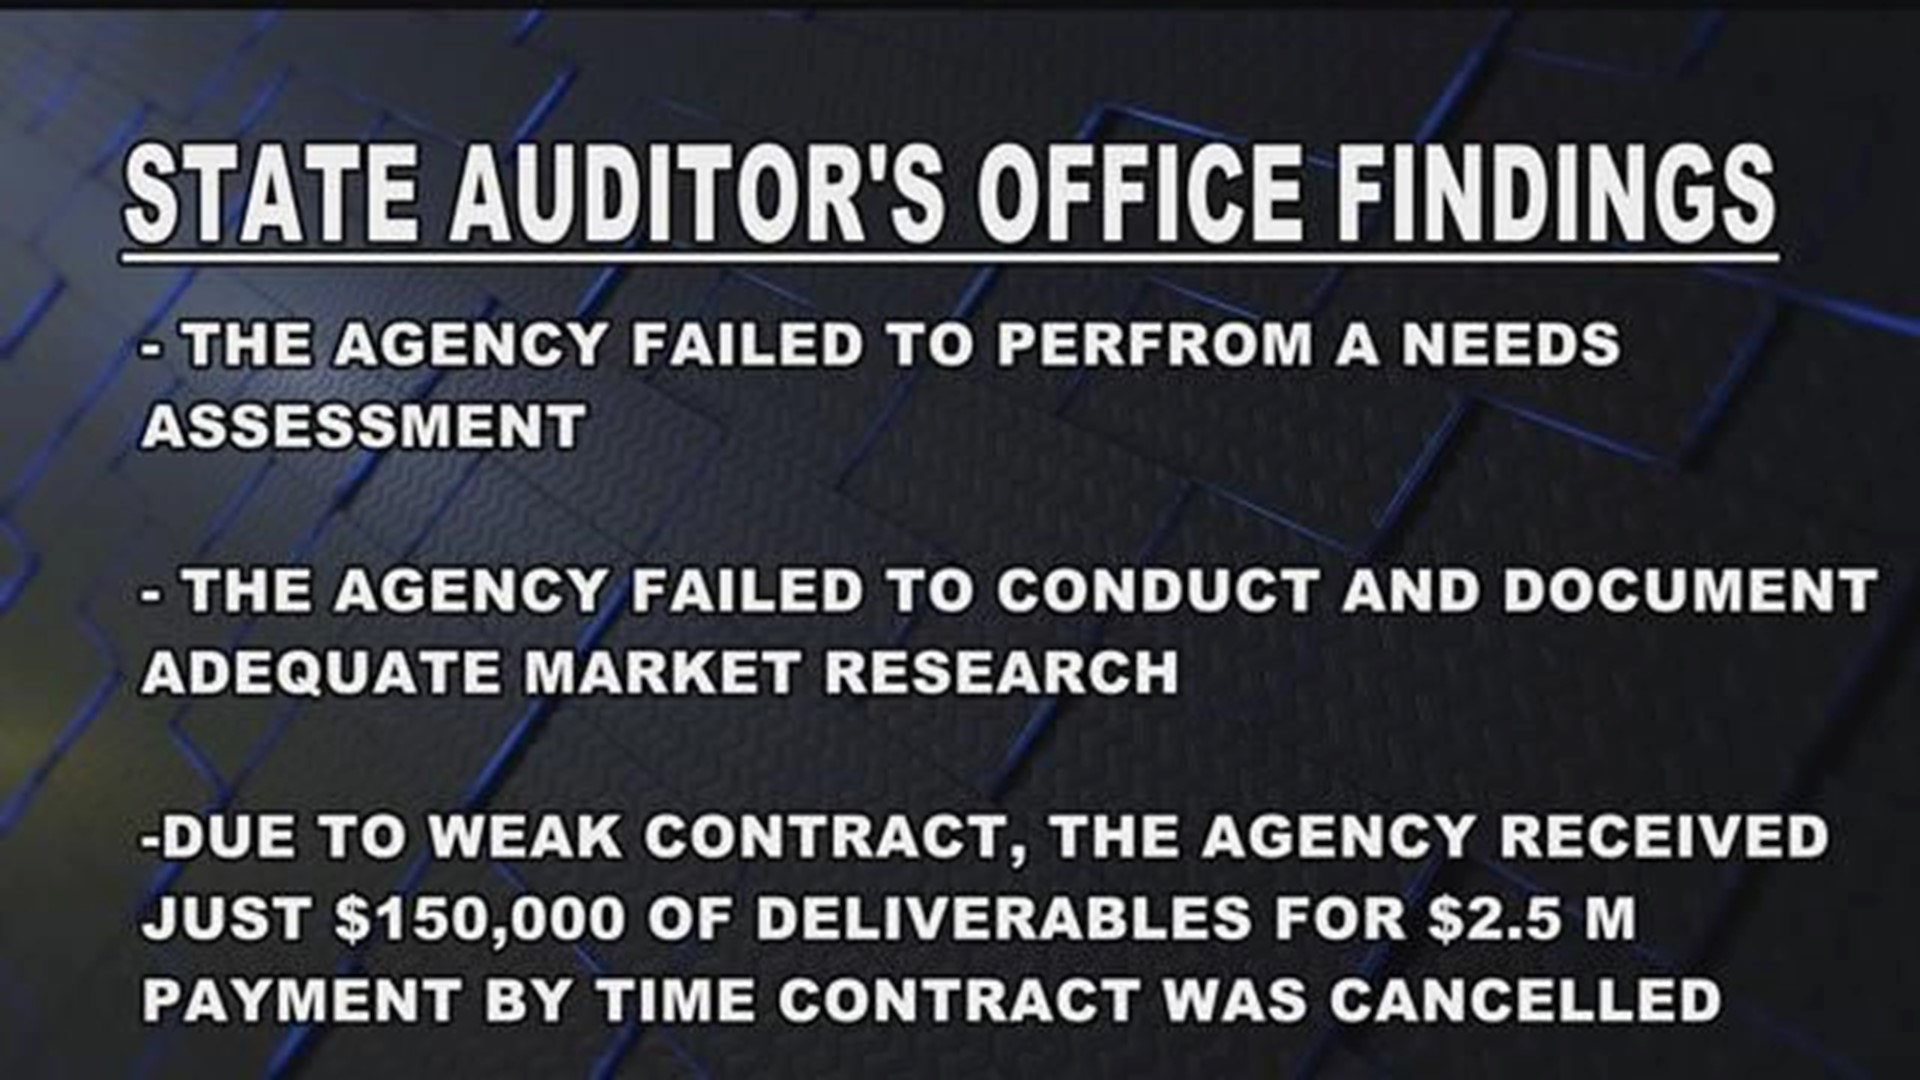 Texas Education Agency receives poor scores on state audit